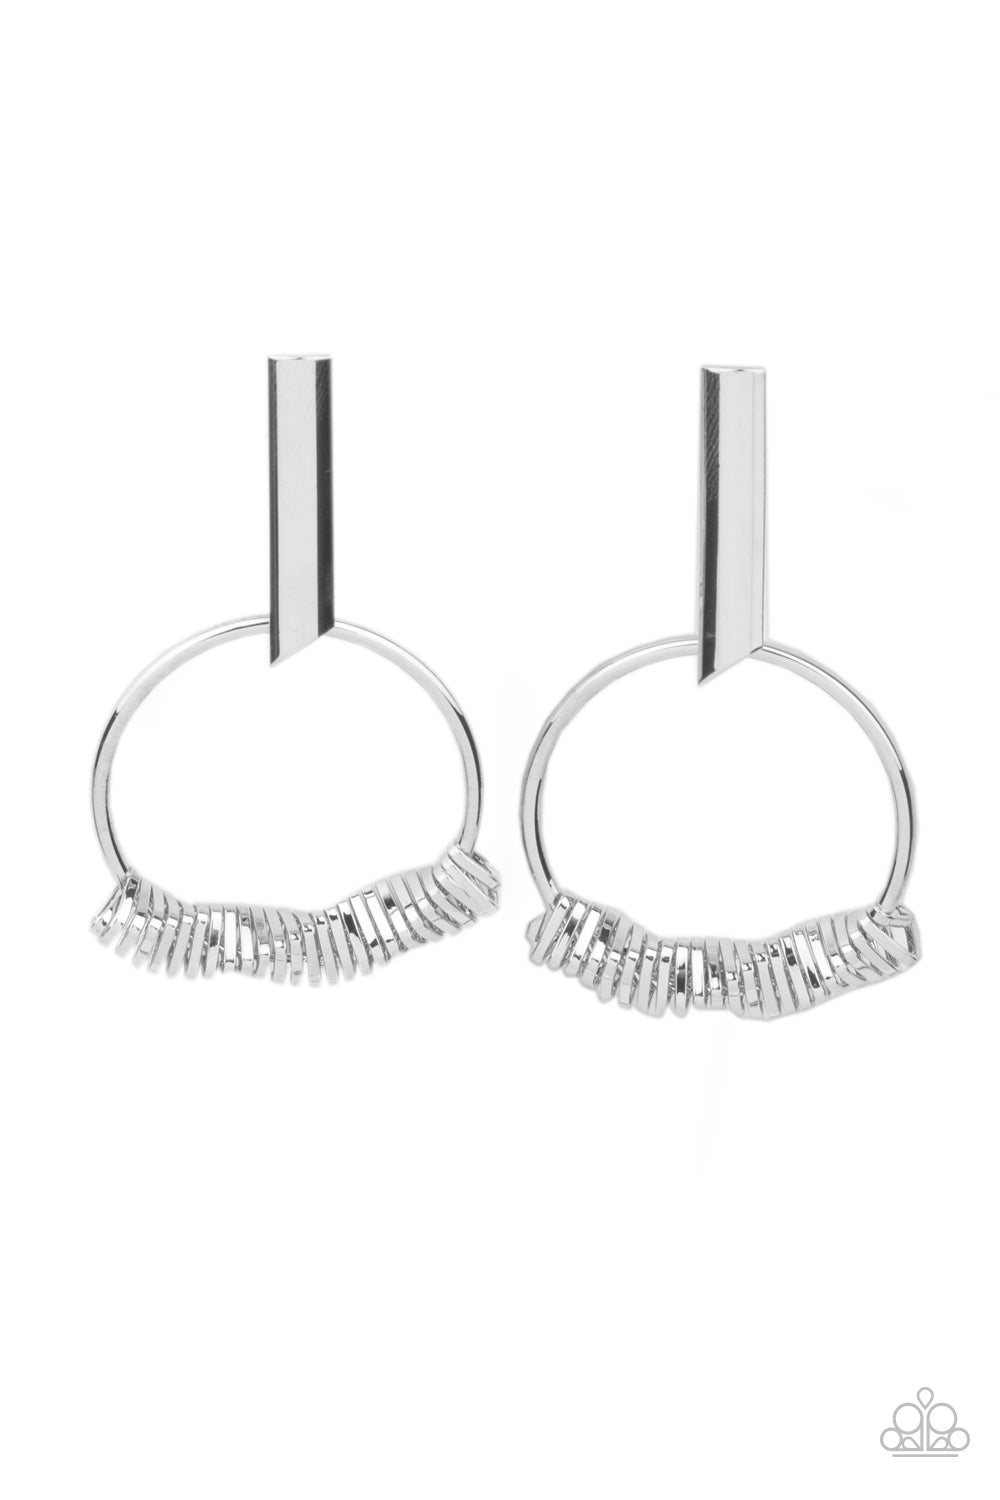 Paparazzi Set Into Motion - Silver Earrings - A Finishing Touch Jewelry